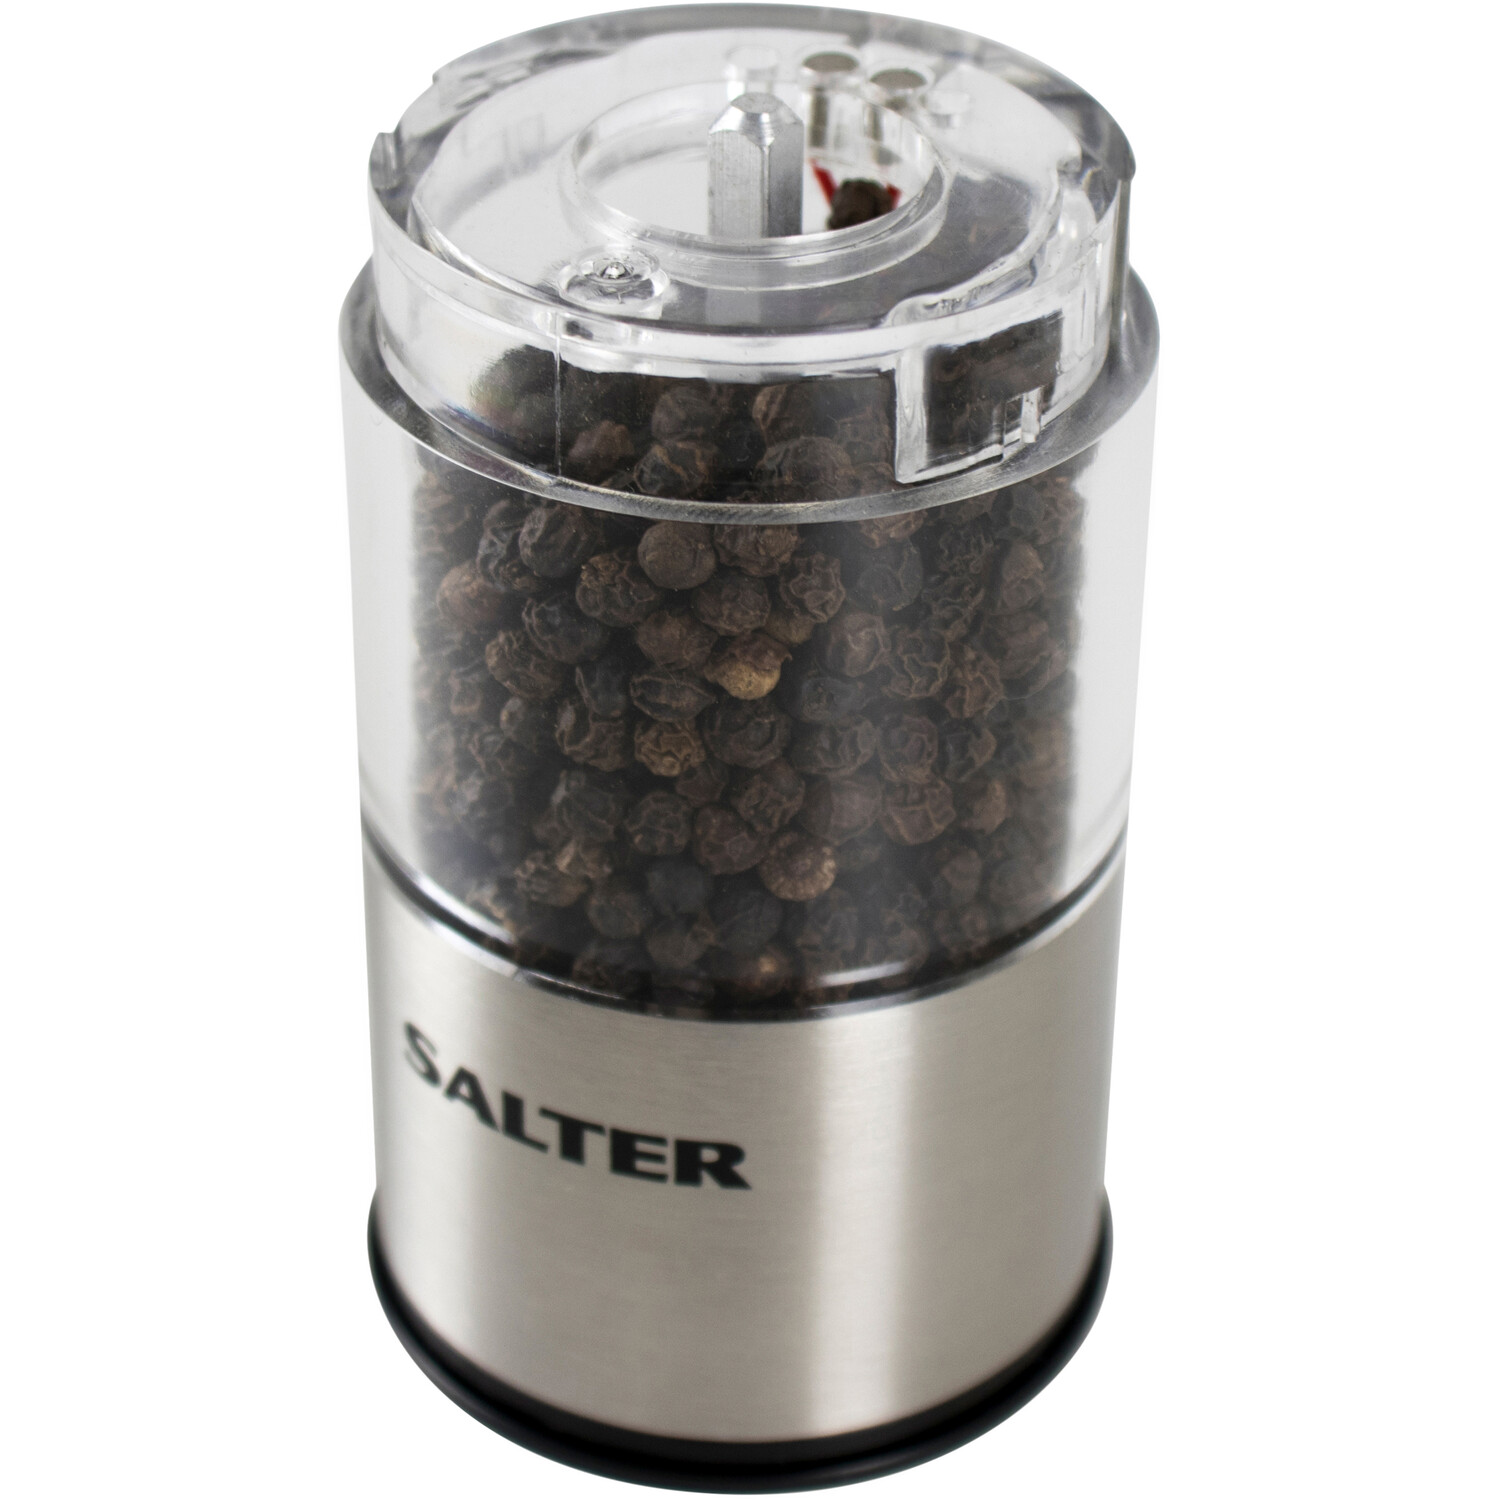 Salter Silver Electronic Salt and Pepper Mill Set Image 8